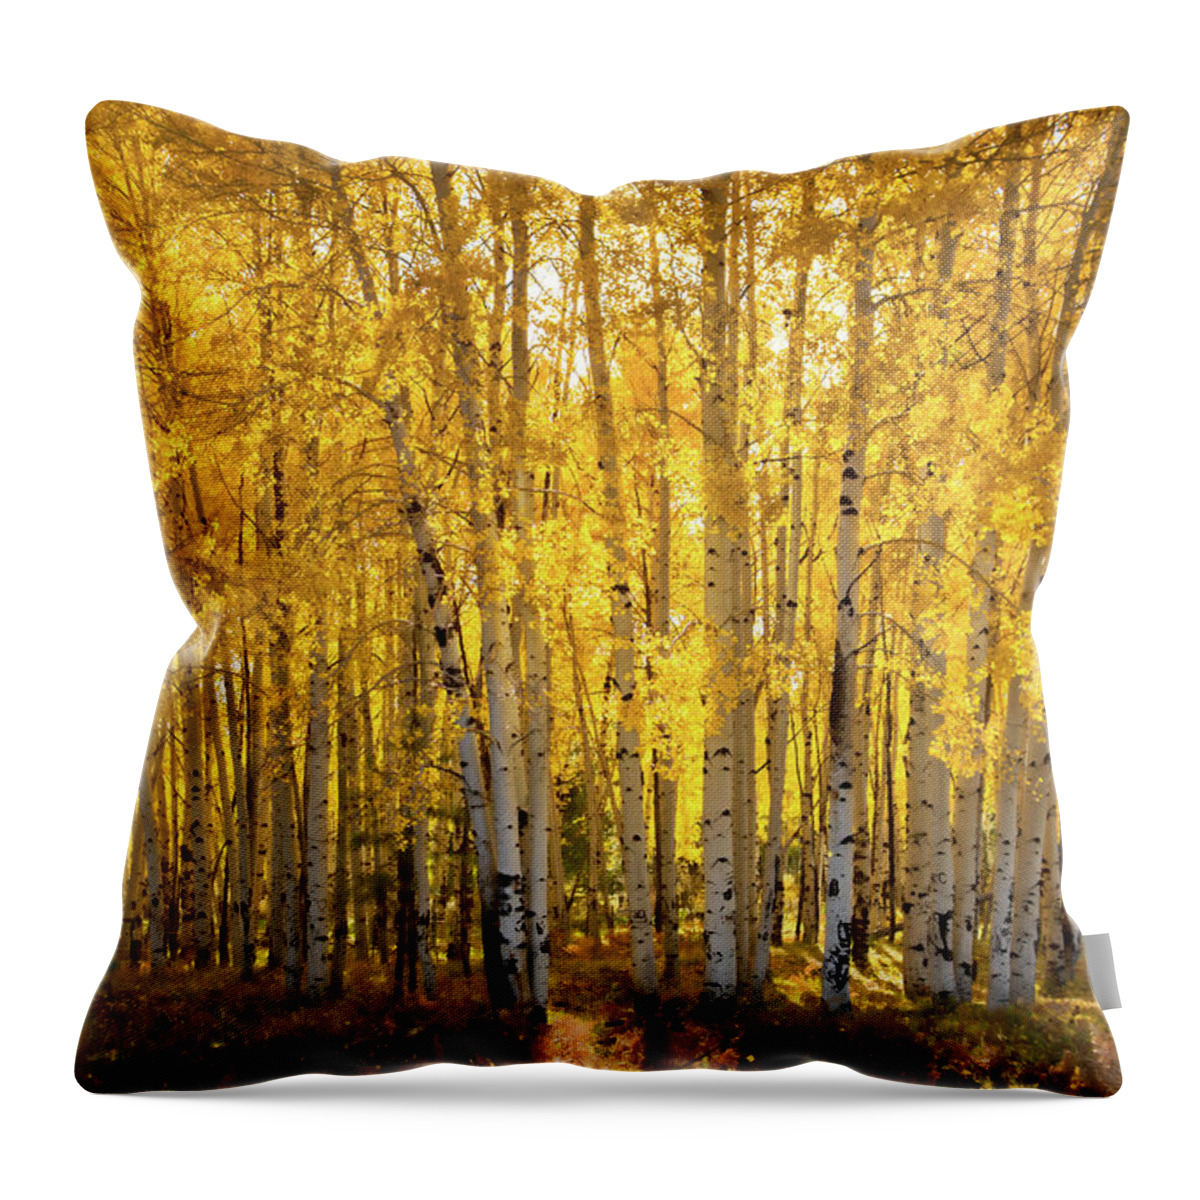 Aspen Grove Throw Pillow featuring the photograph There's Gold In Them Woods by Saija Lehtonen